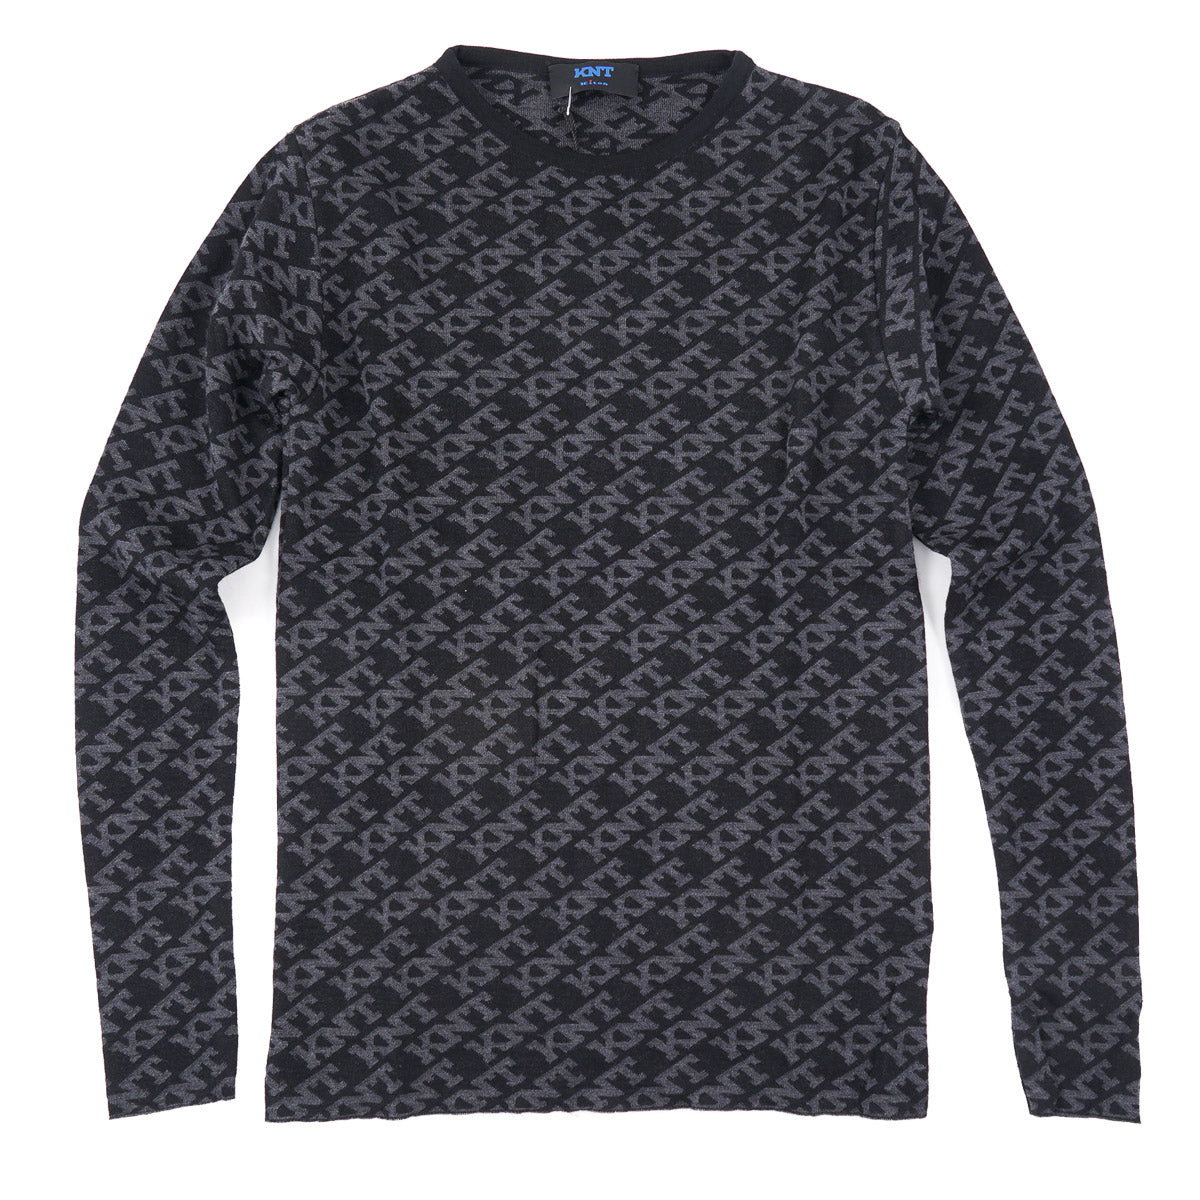 Kiton KNT Cashmere and Wool Sweater - Top Shelf Apparel